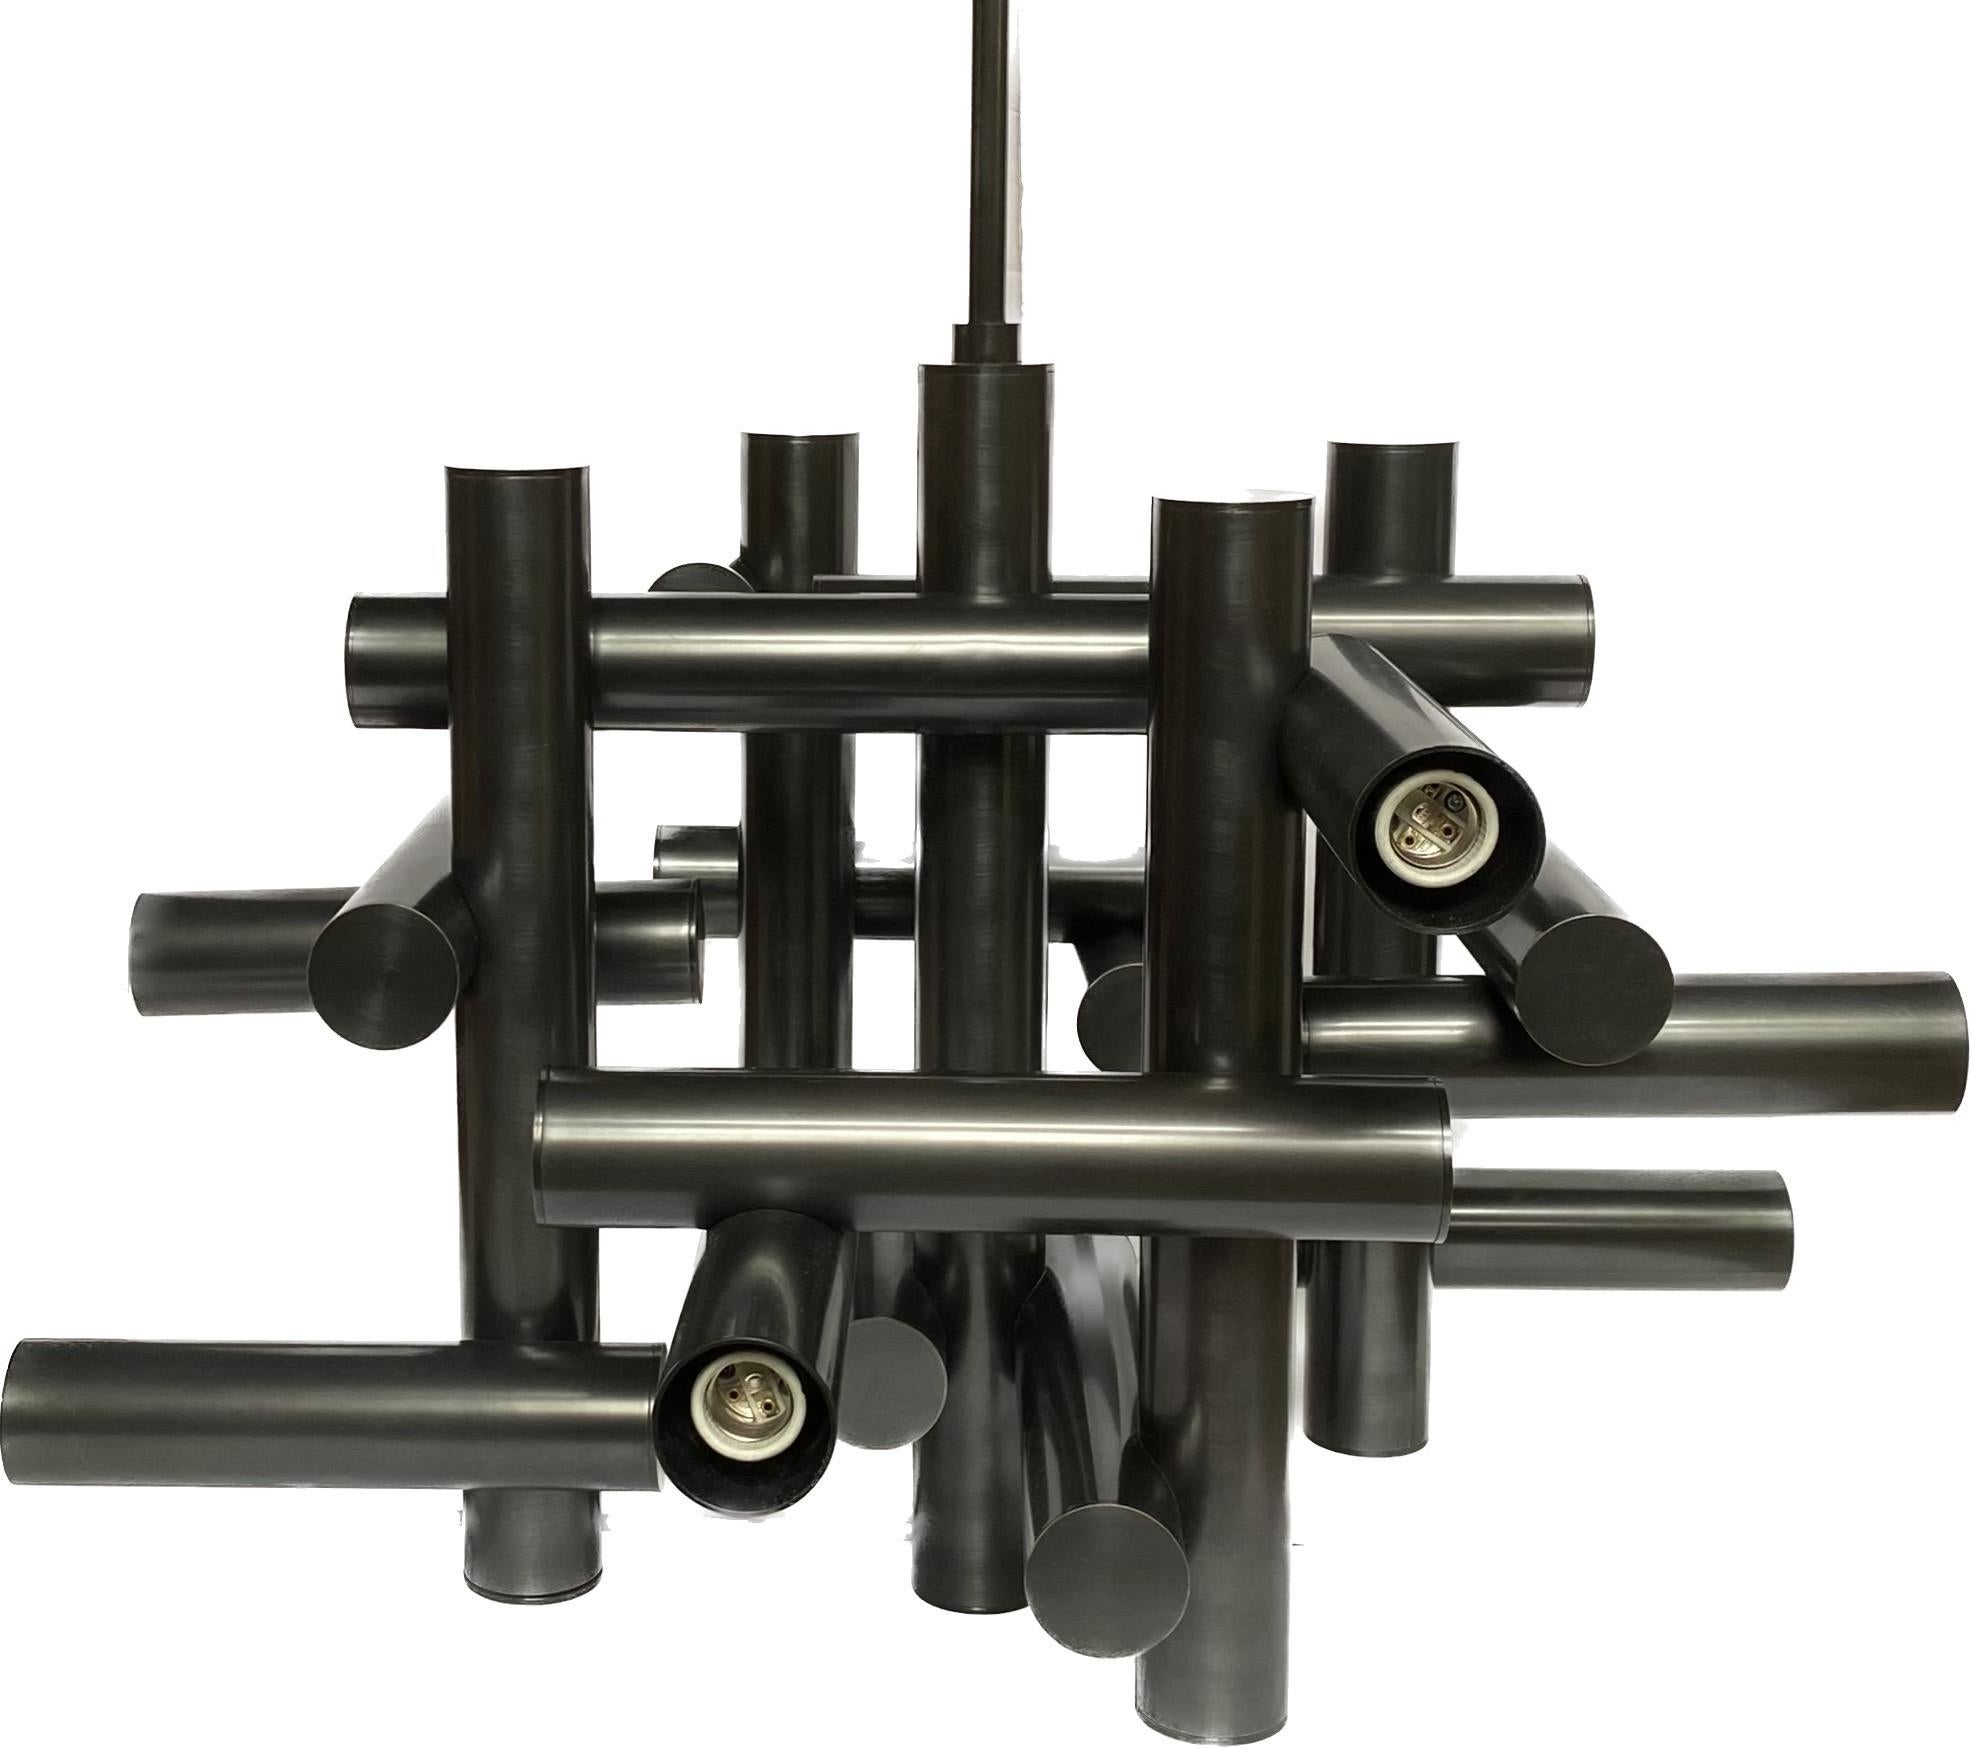 Modern tubular Milano chandelier by Jonathan Alder, for Robert Abbey. This sculptural tiered statement chandelier features a deep bronze tone metal. This was a floor model in our showroom and is being offered at a special price. It is brand new and